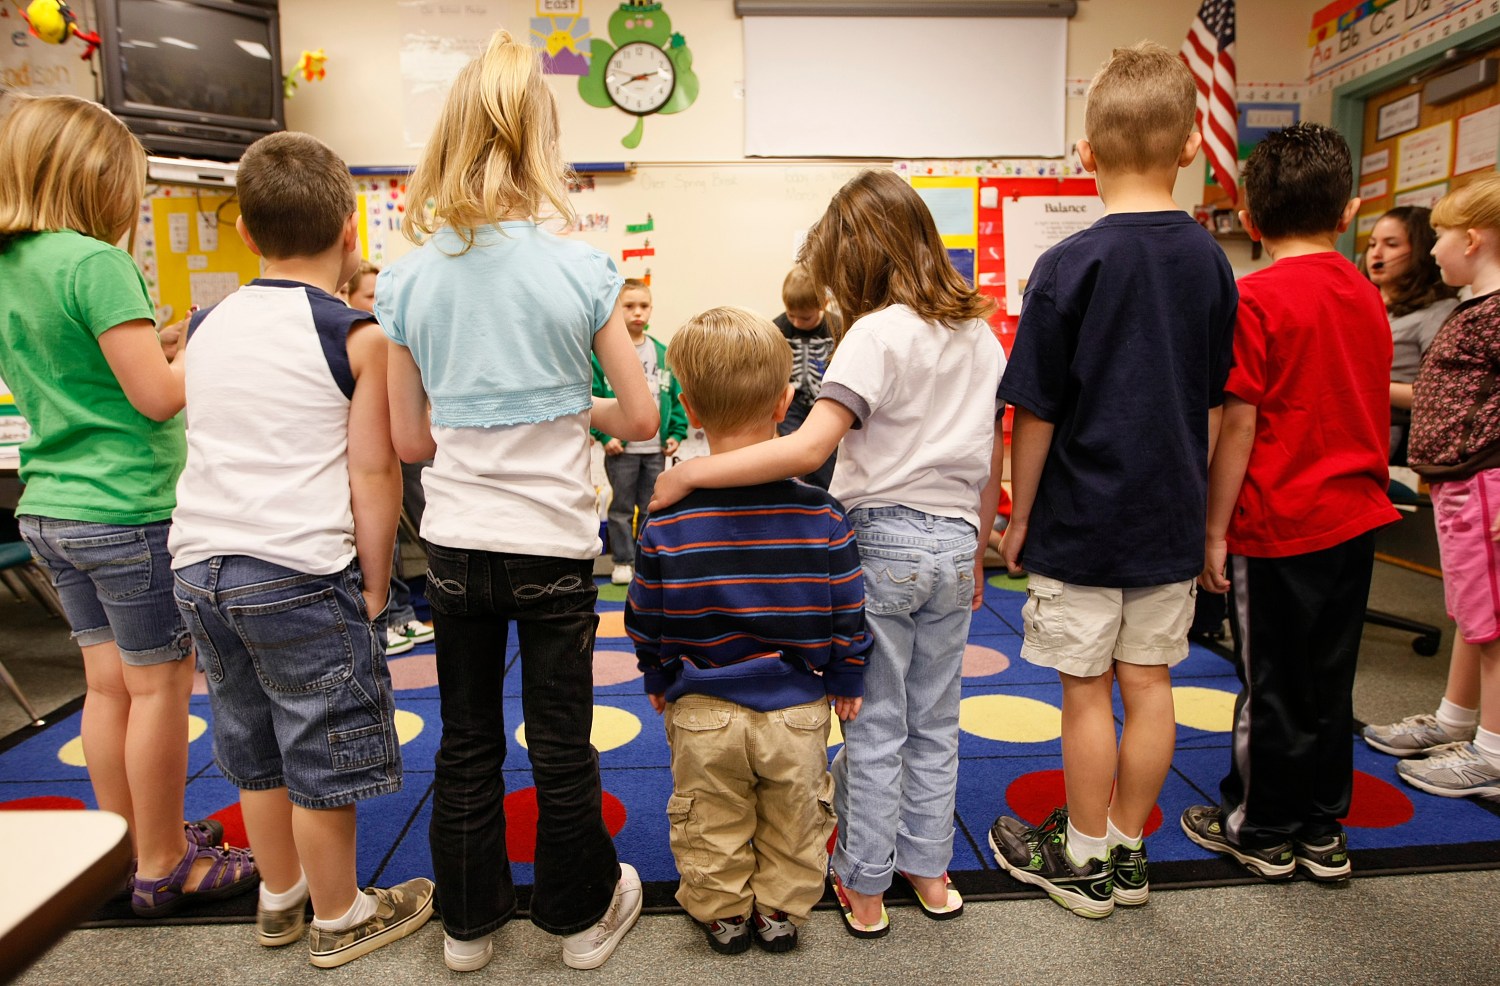 First grader Adam Kotzian (C) does a spelling drill with classmates in his classroom at Eagleview Elementary school in Thornton, Colorado..